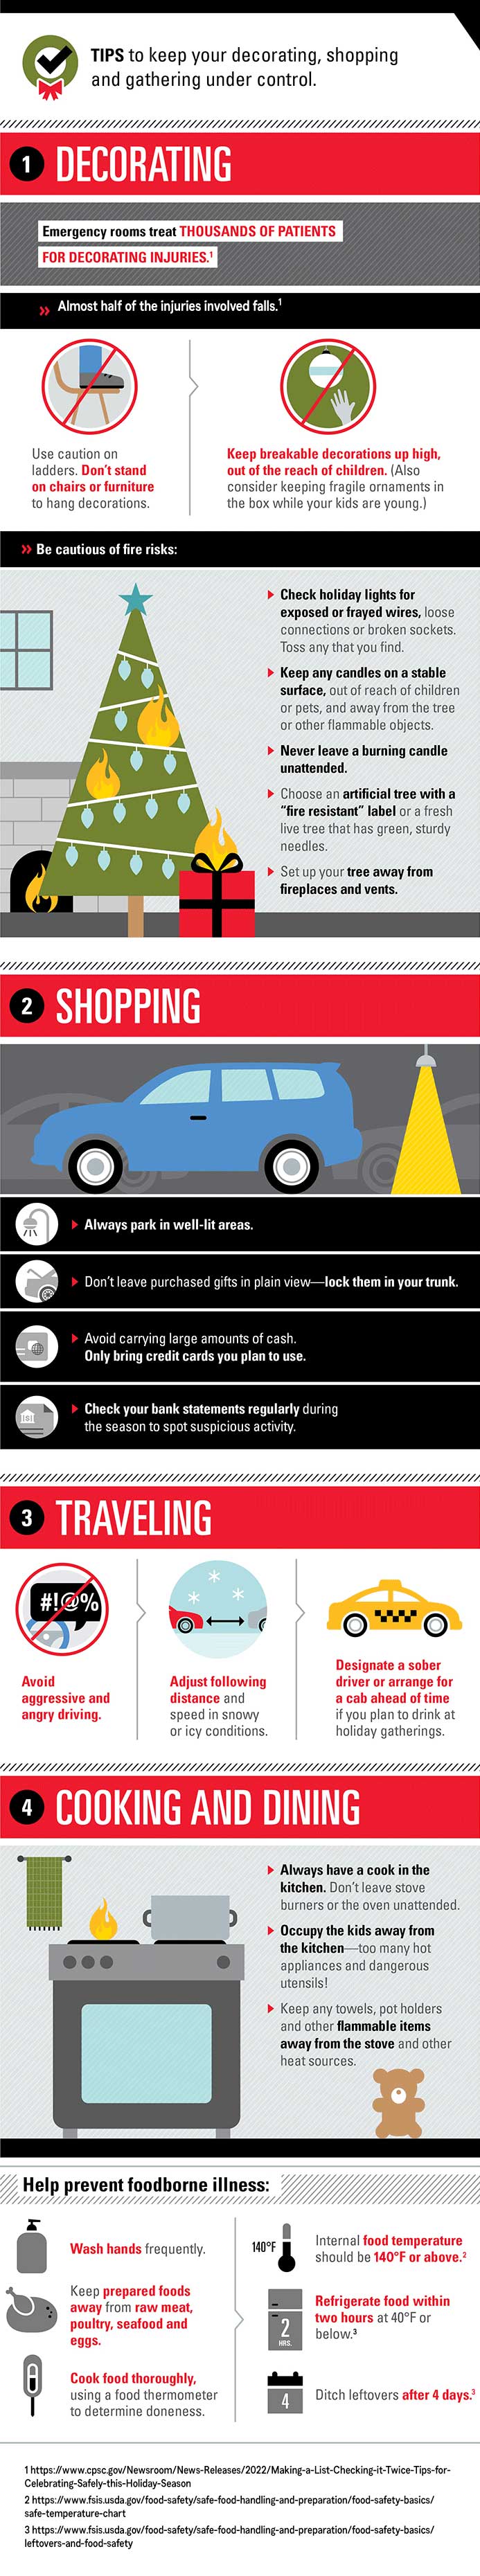 S.C. Holiday Driving Tips